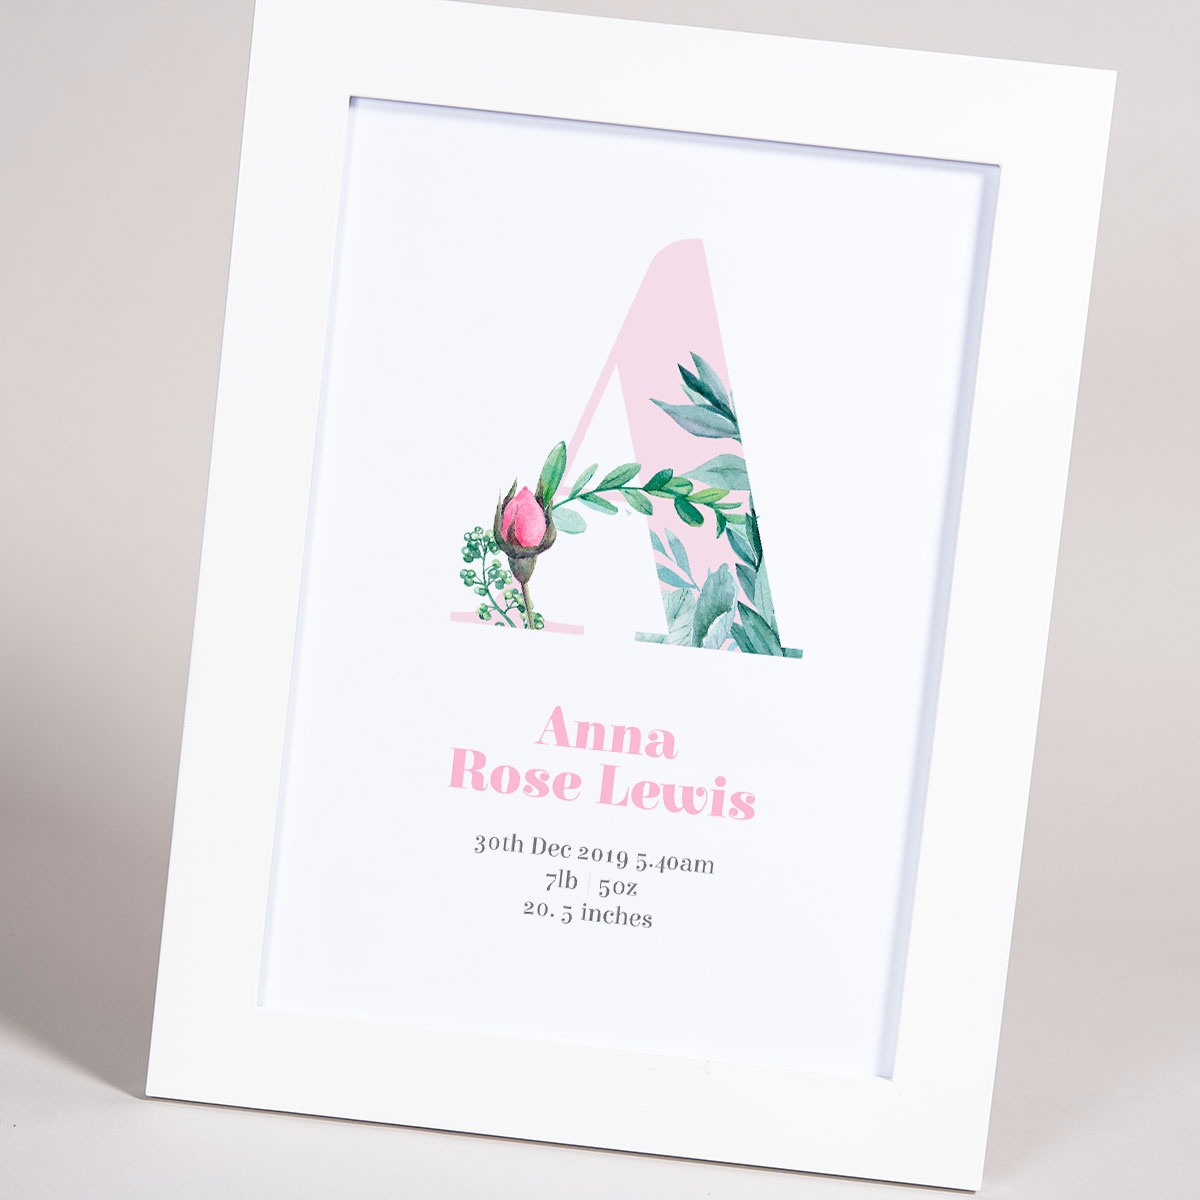 Personalised Framed Print - New Baby Floral Letter